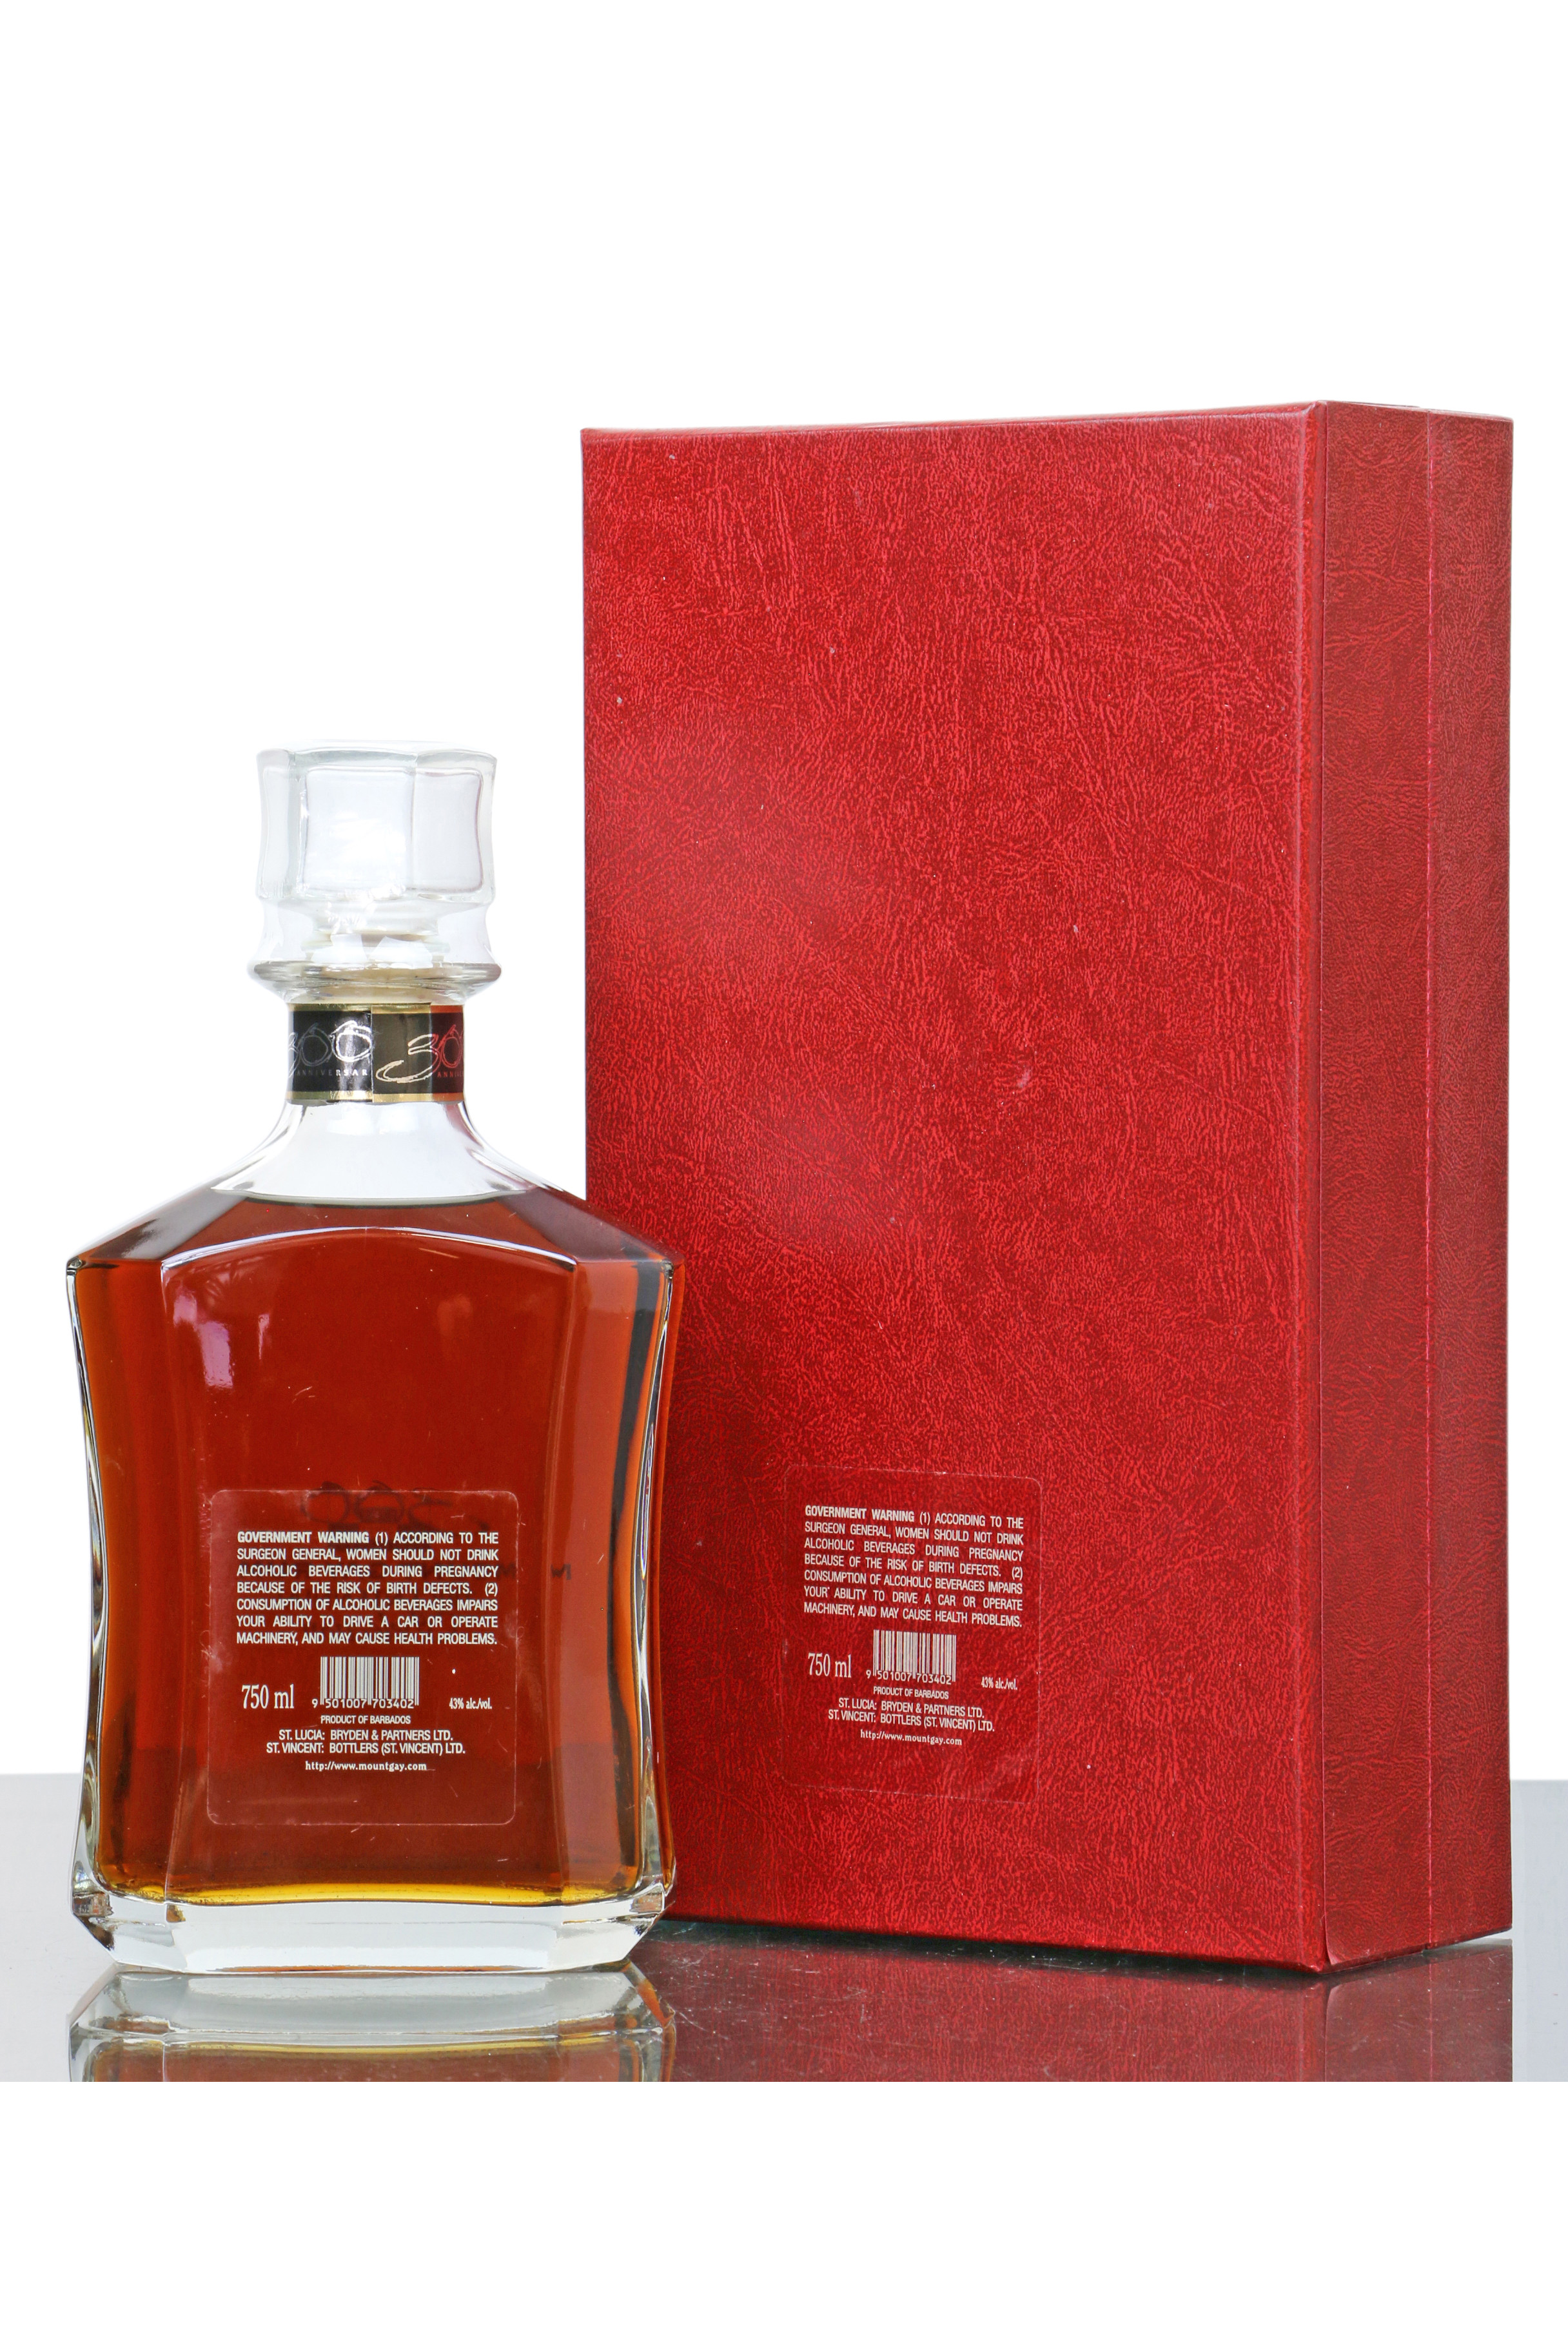 Mount Gay Rum - Tricentennial Selection (75cl) - Just Whisky Auctions